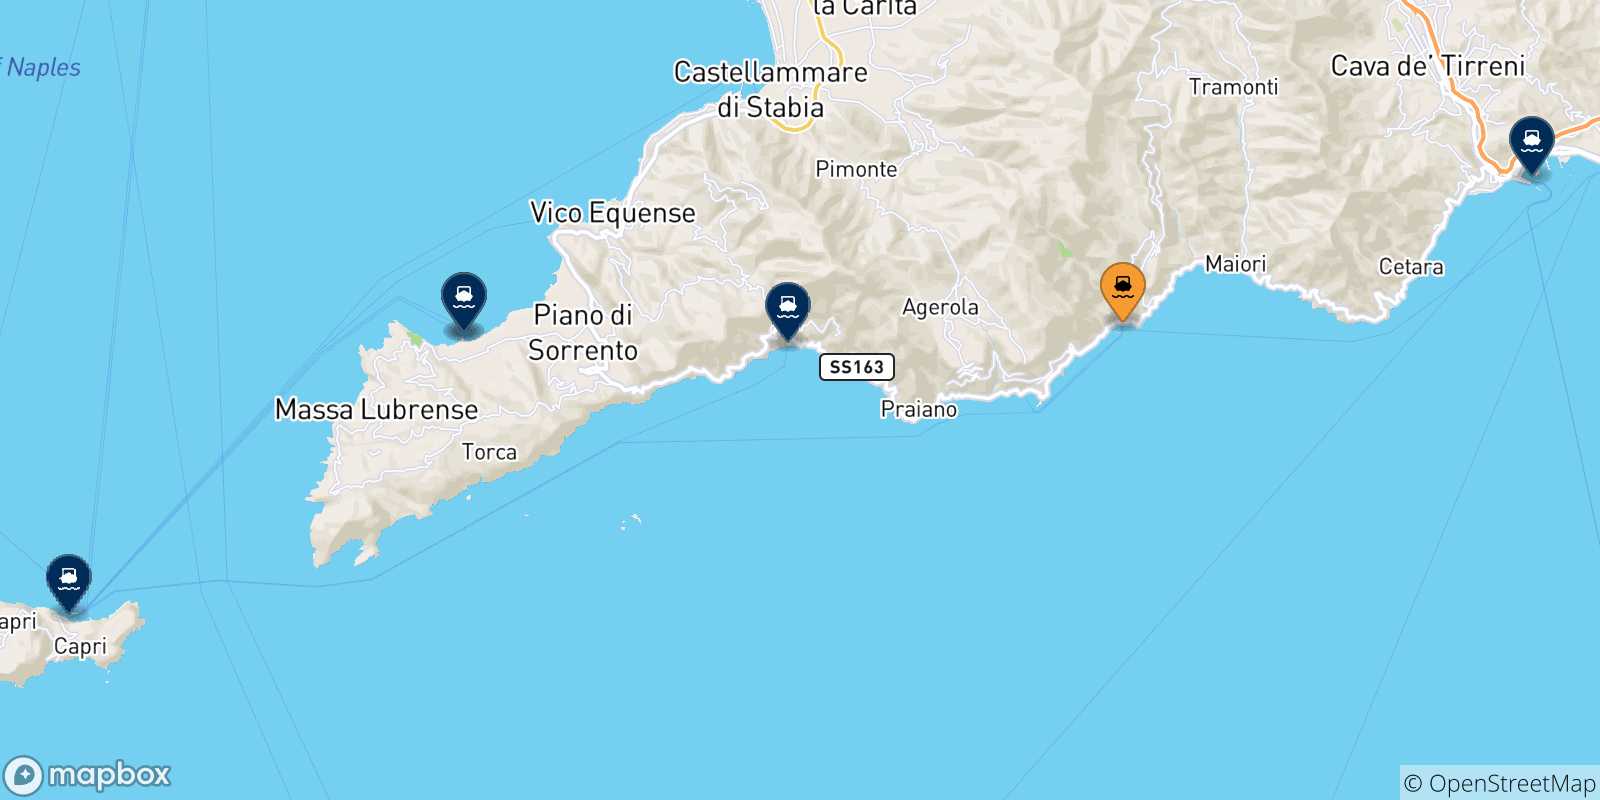 Map of the possible routes between Amalfi and Italy